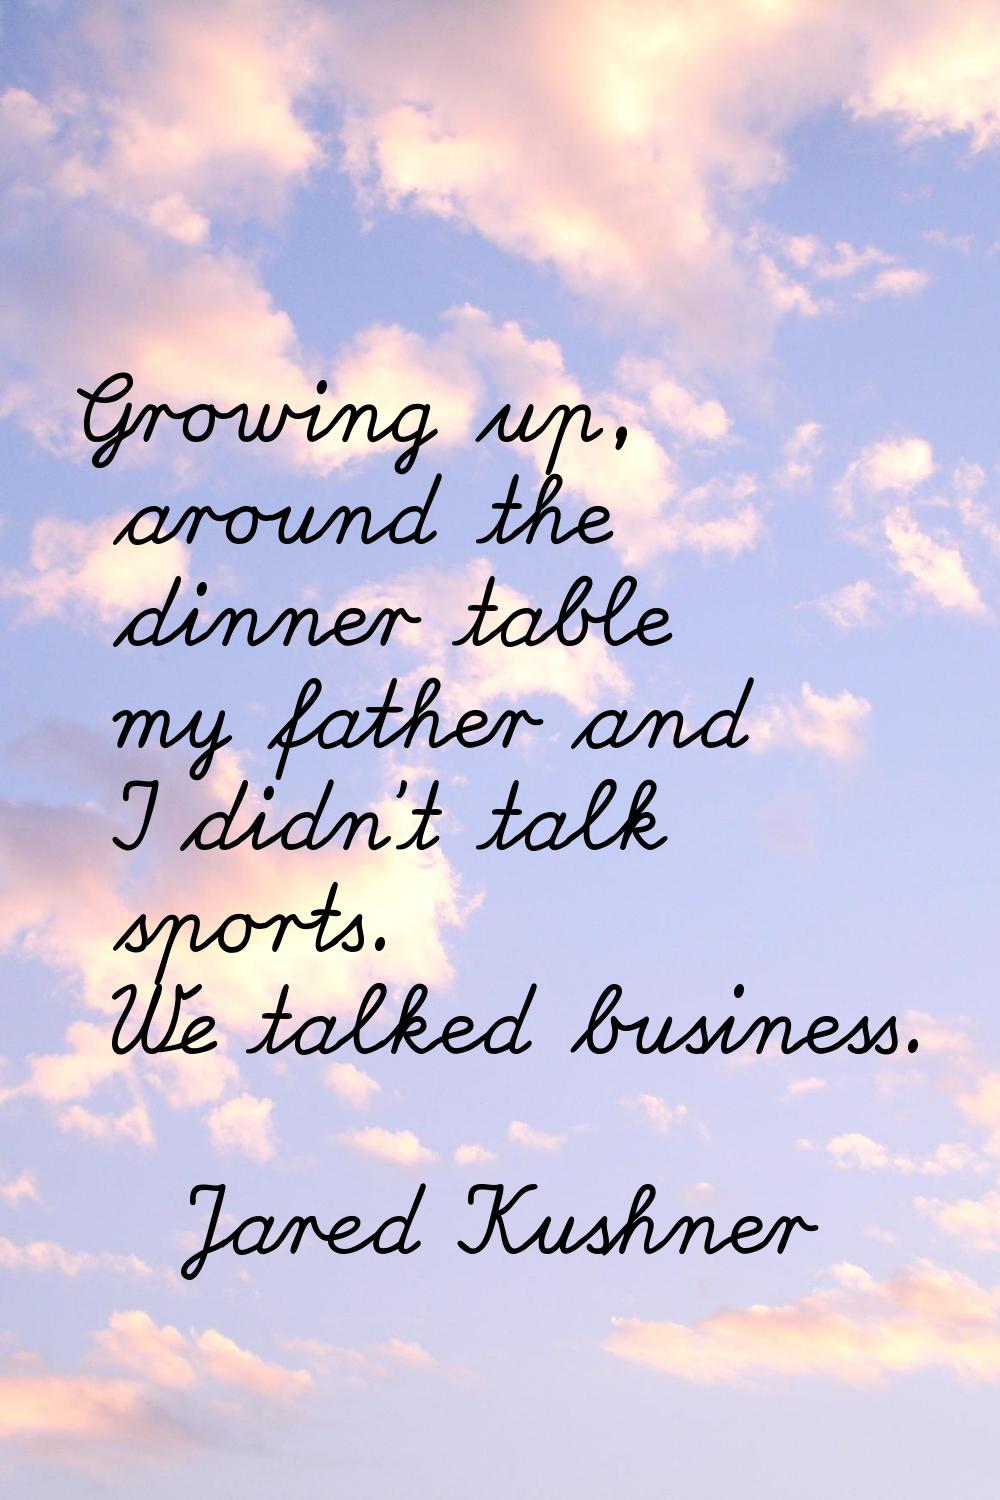 Growing up, around the dinner table my father and I didn't talk sports. We talked business.